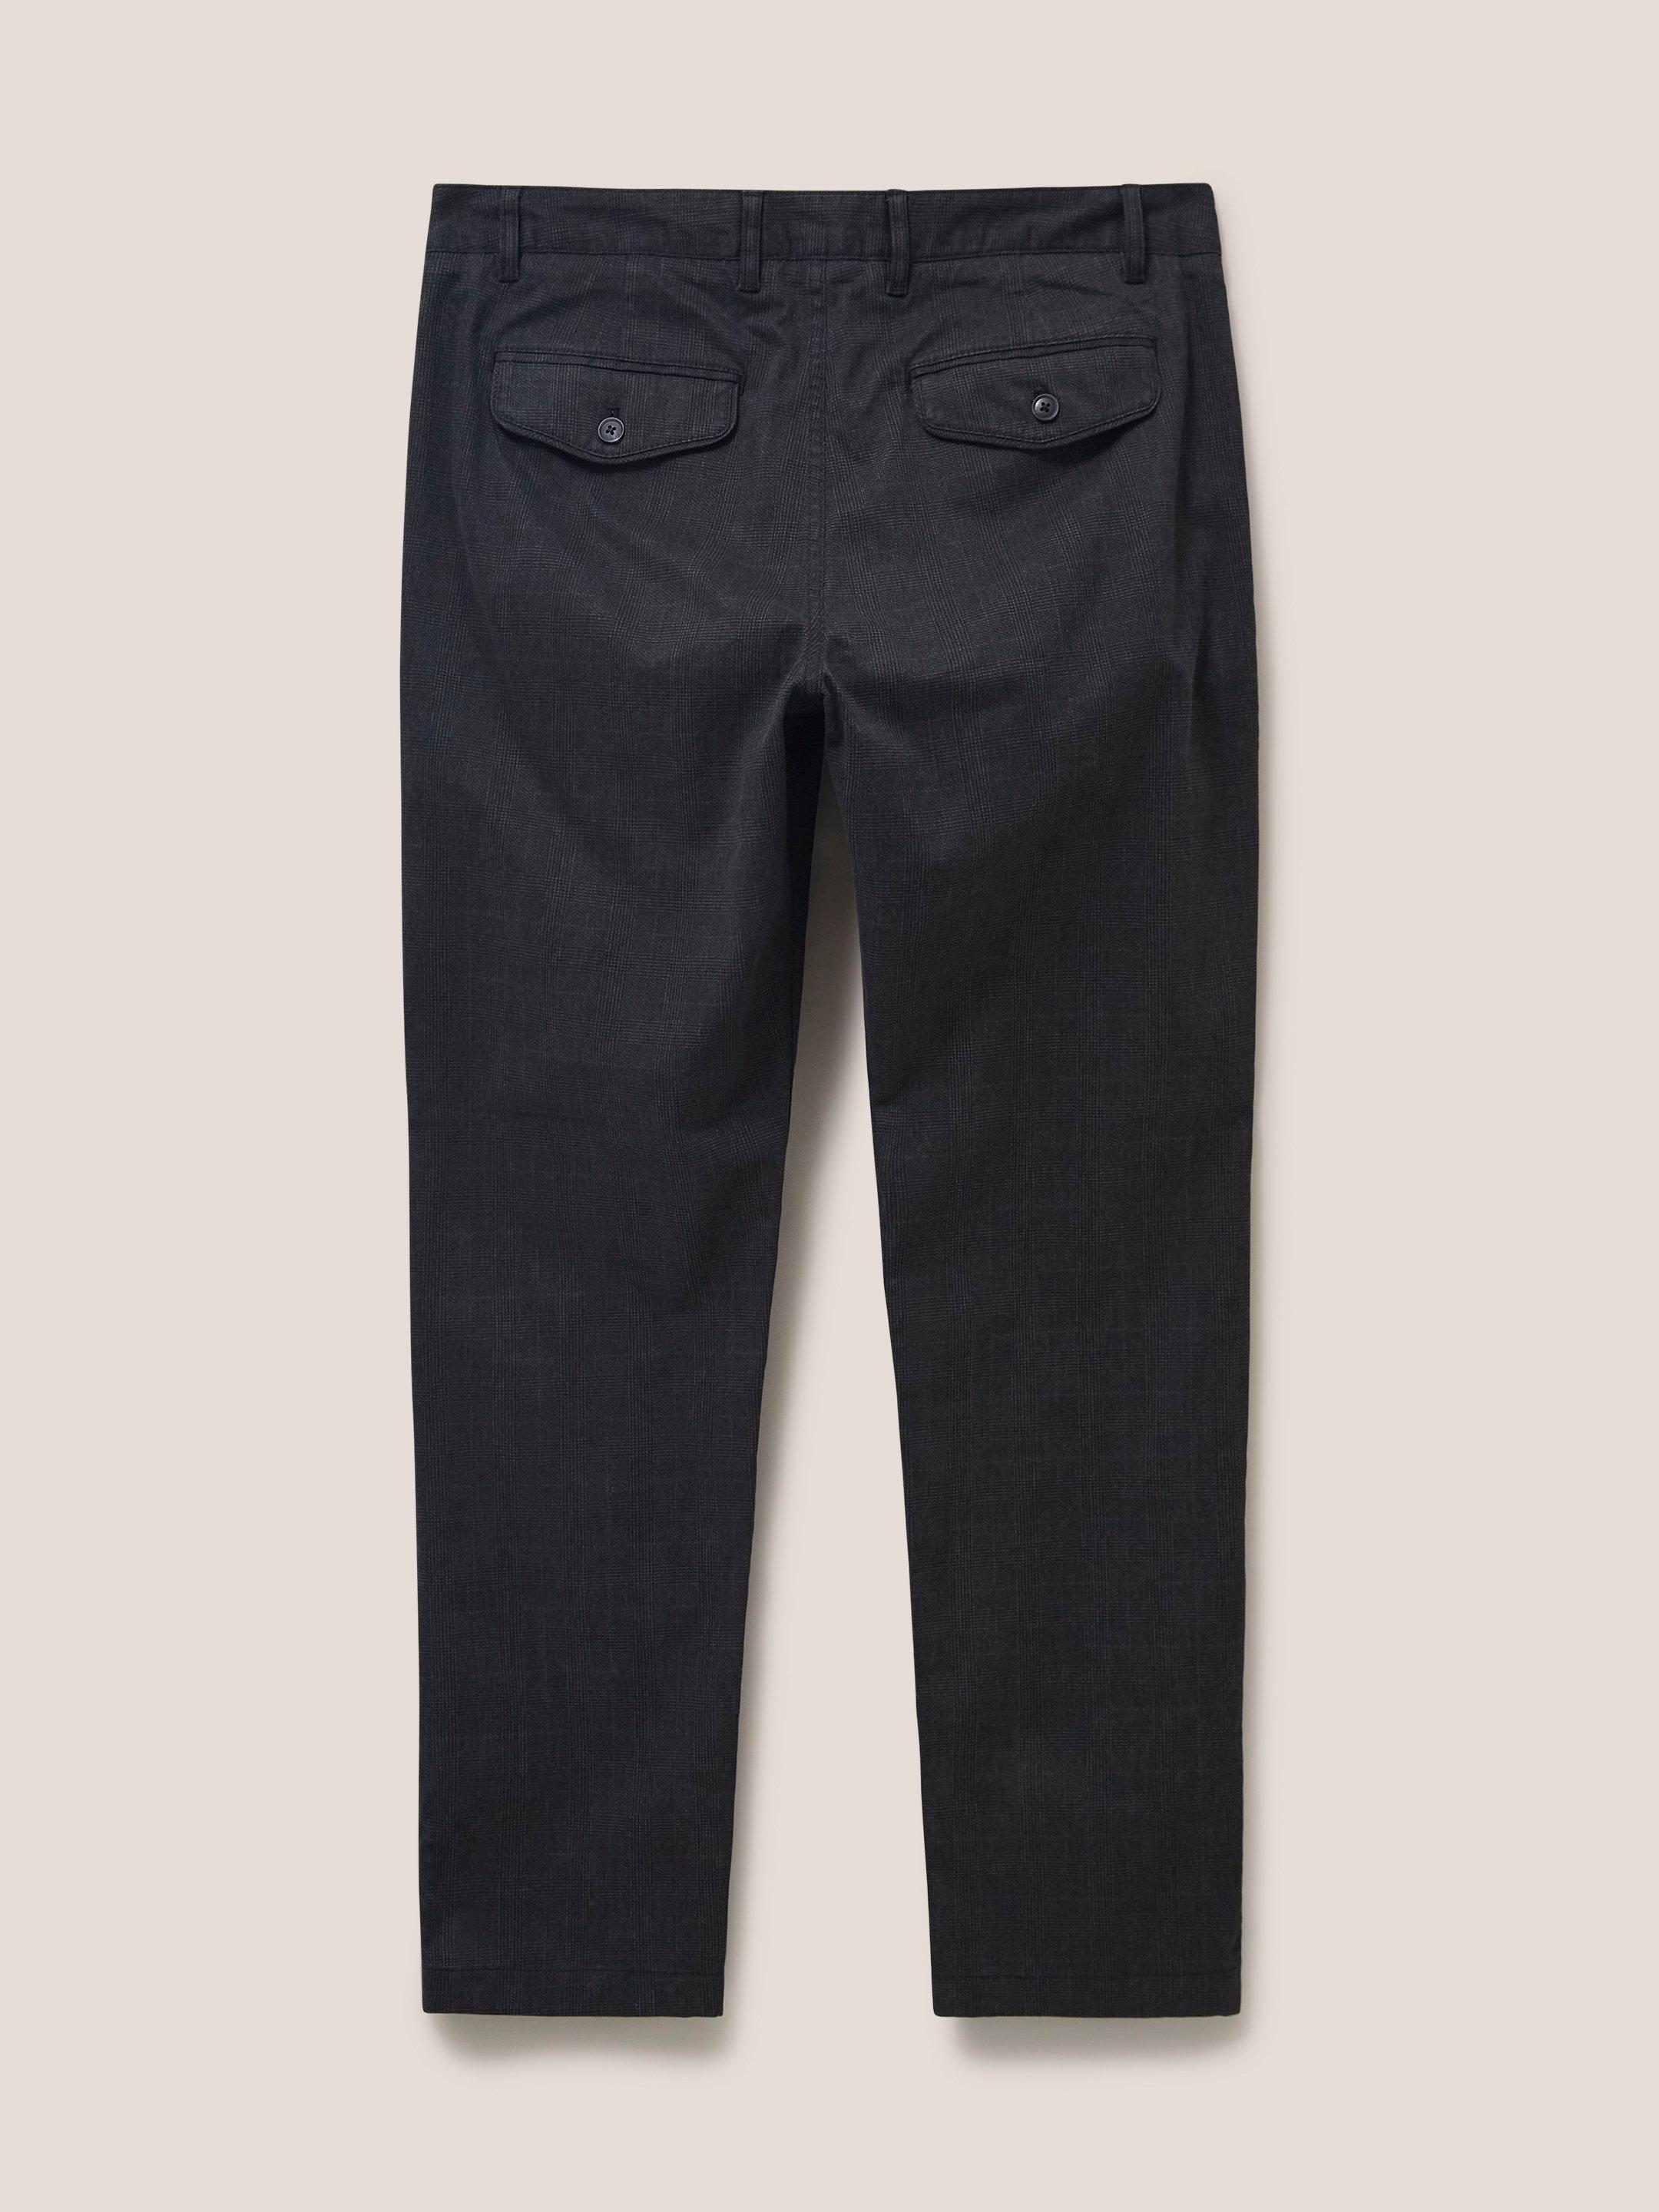 Smart Sutton Trouser in CHARC GREY - FLAT BACK